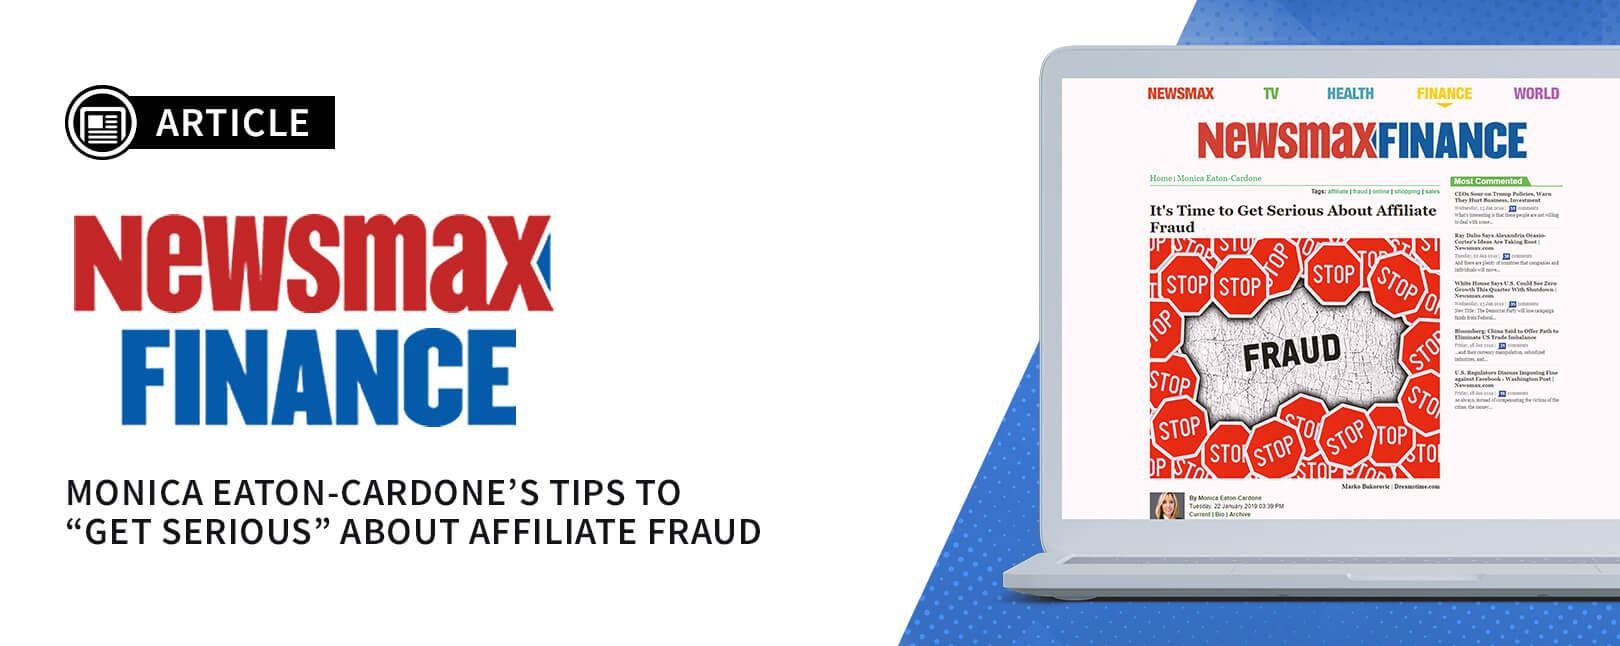 Get Serious About Affiliate Fraud Newsmax